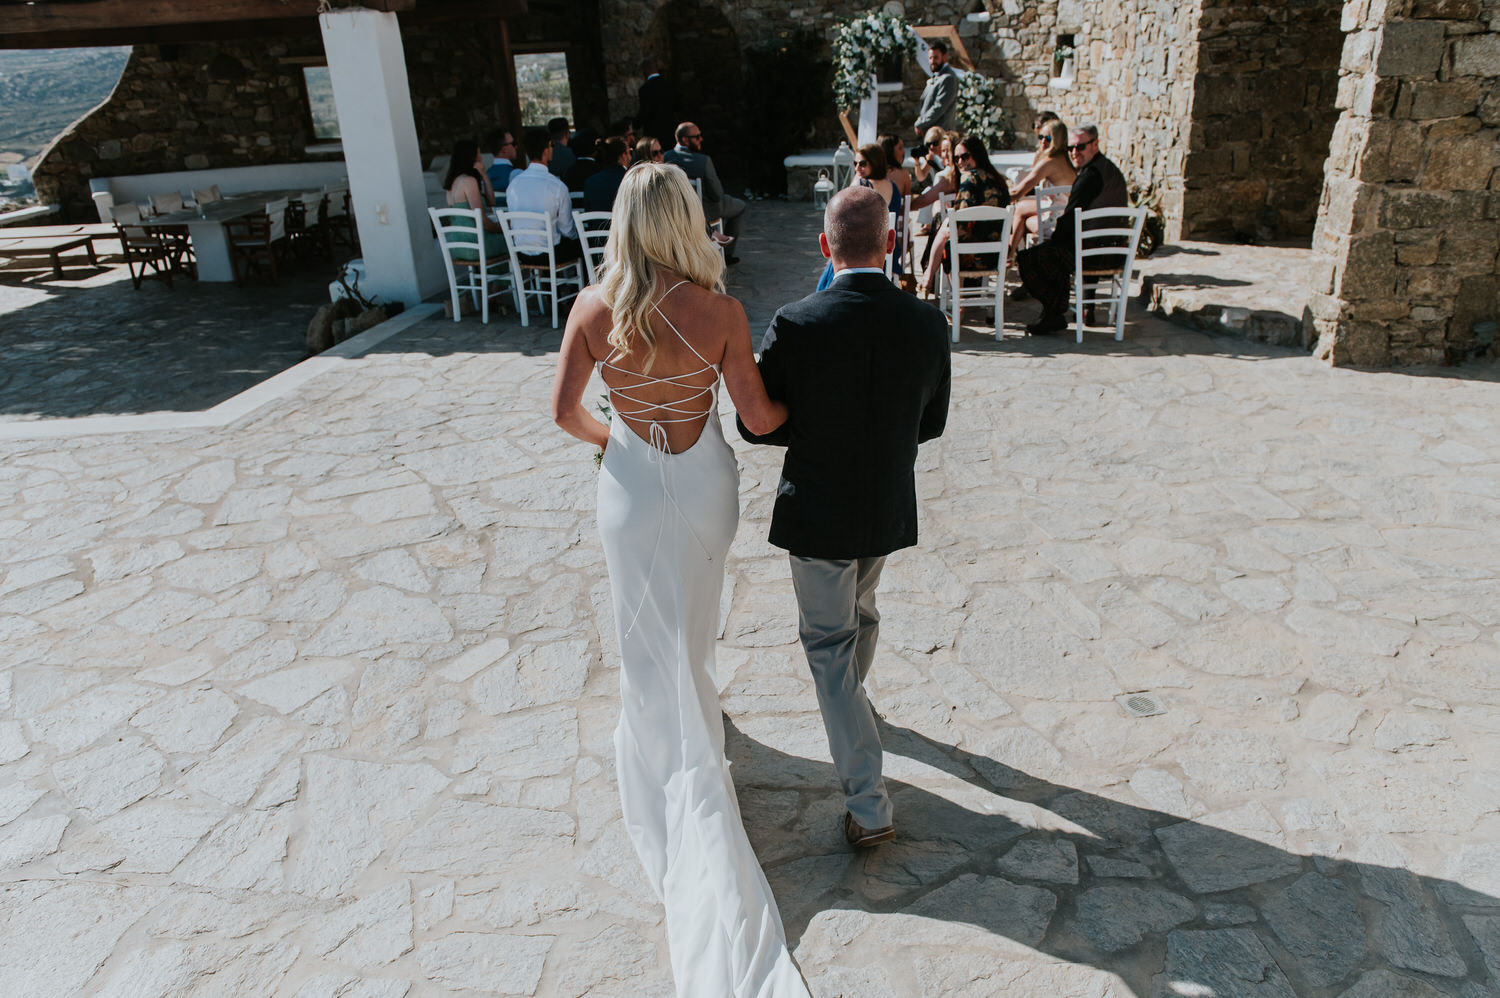 Mykonos wedding photographer: bride walking down the aisle in her beautiful dress with guests looking at her.